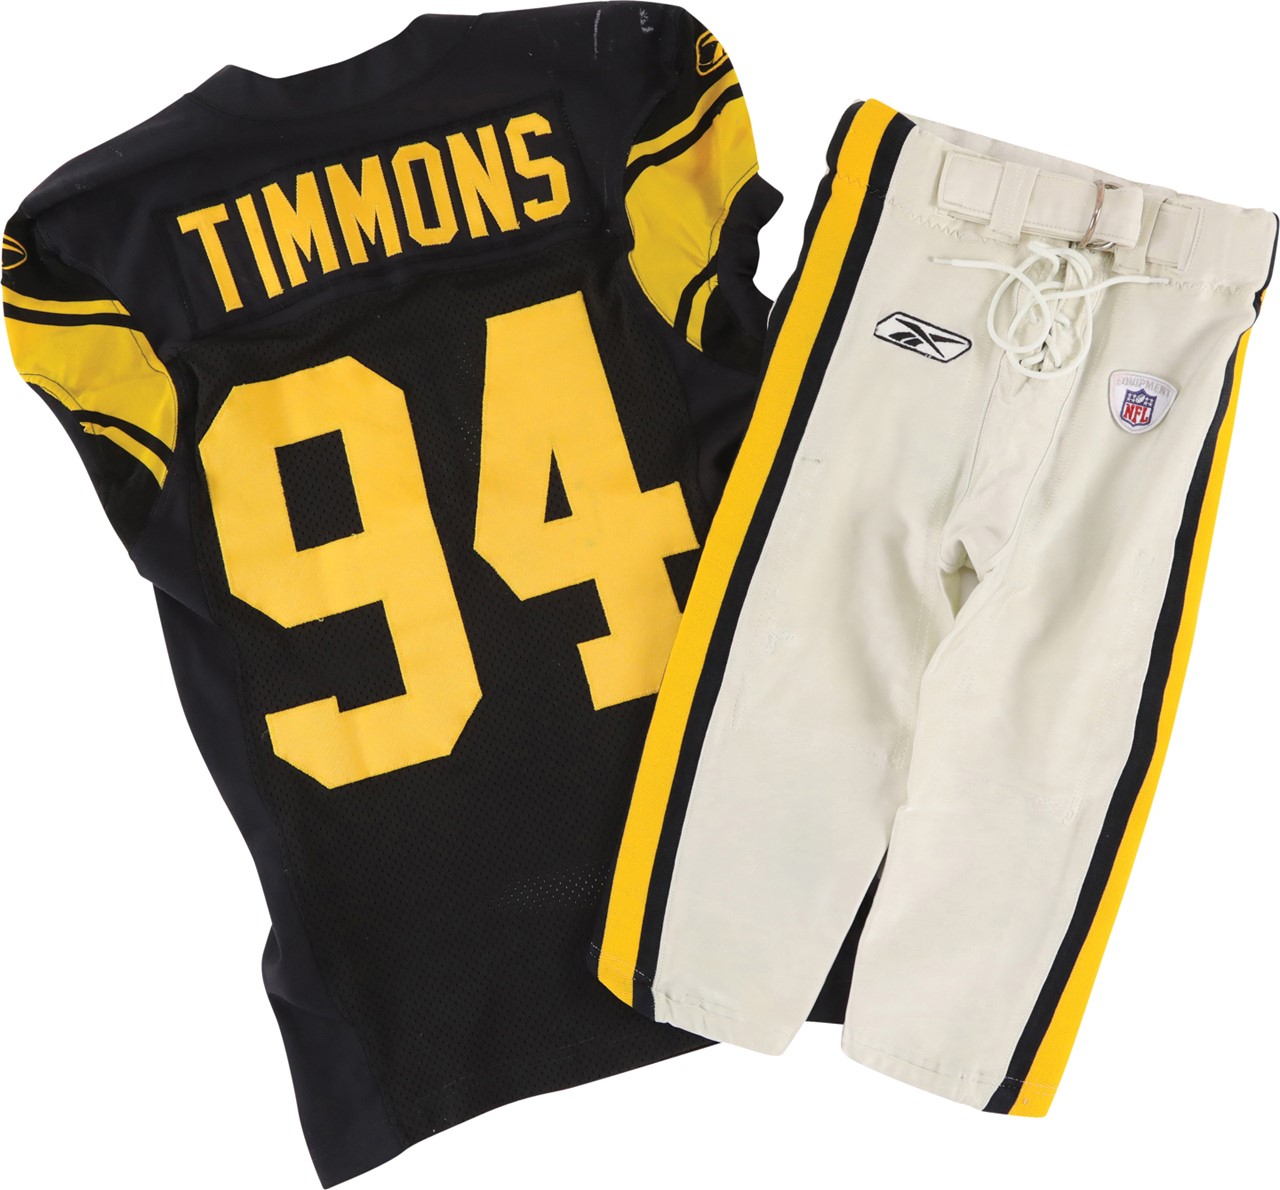 - 2008-11 Lawrence Timmons Pittsburgh Steelers Game Worn Throwback Jersey with Pants - Worn in Three Seasons! (Photo-Matched & Steelers LOA)